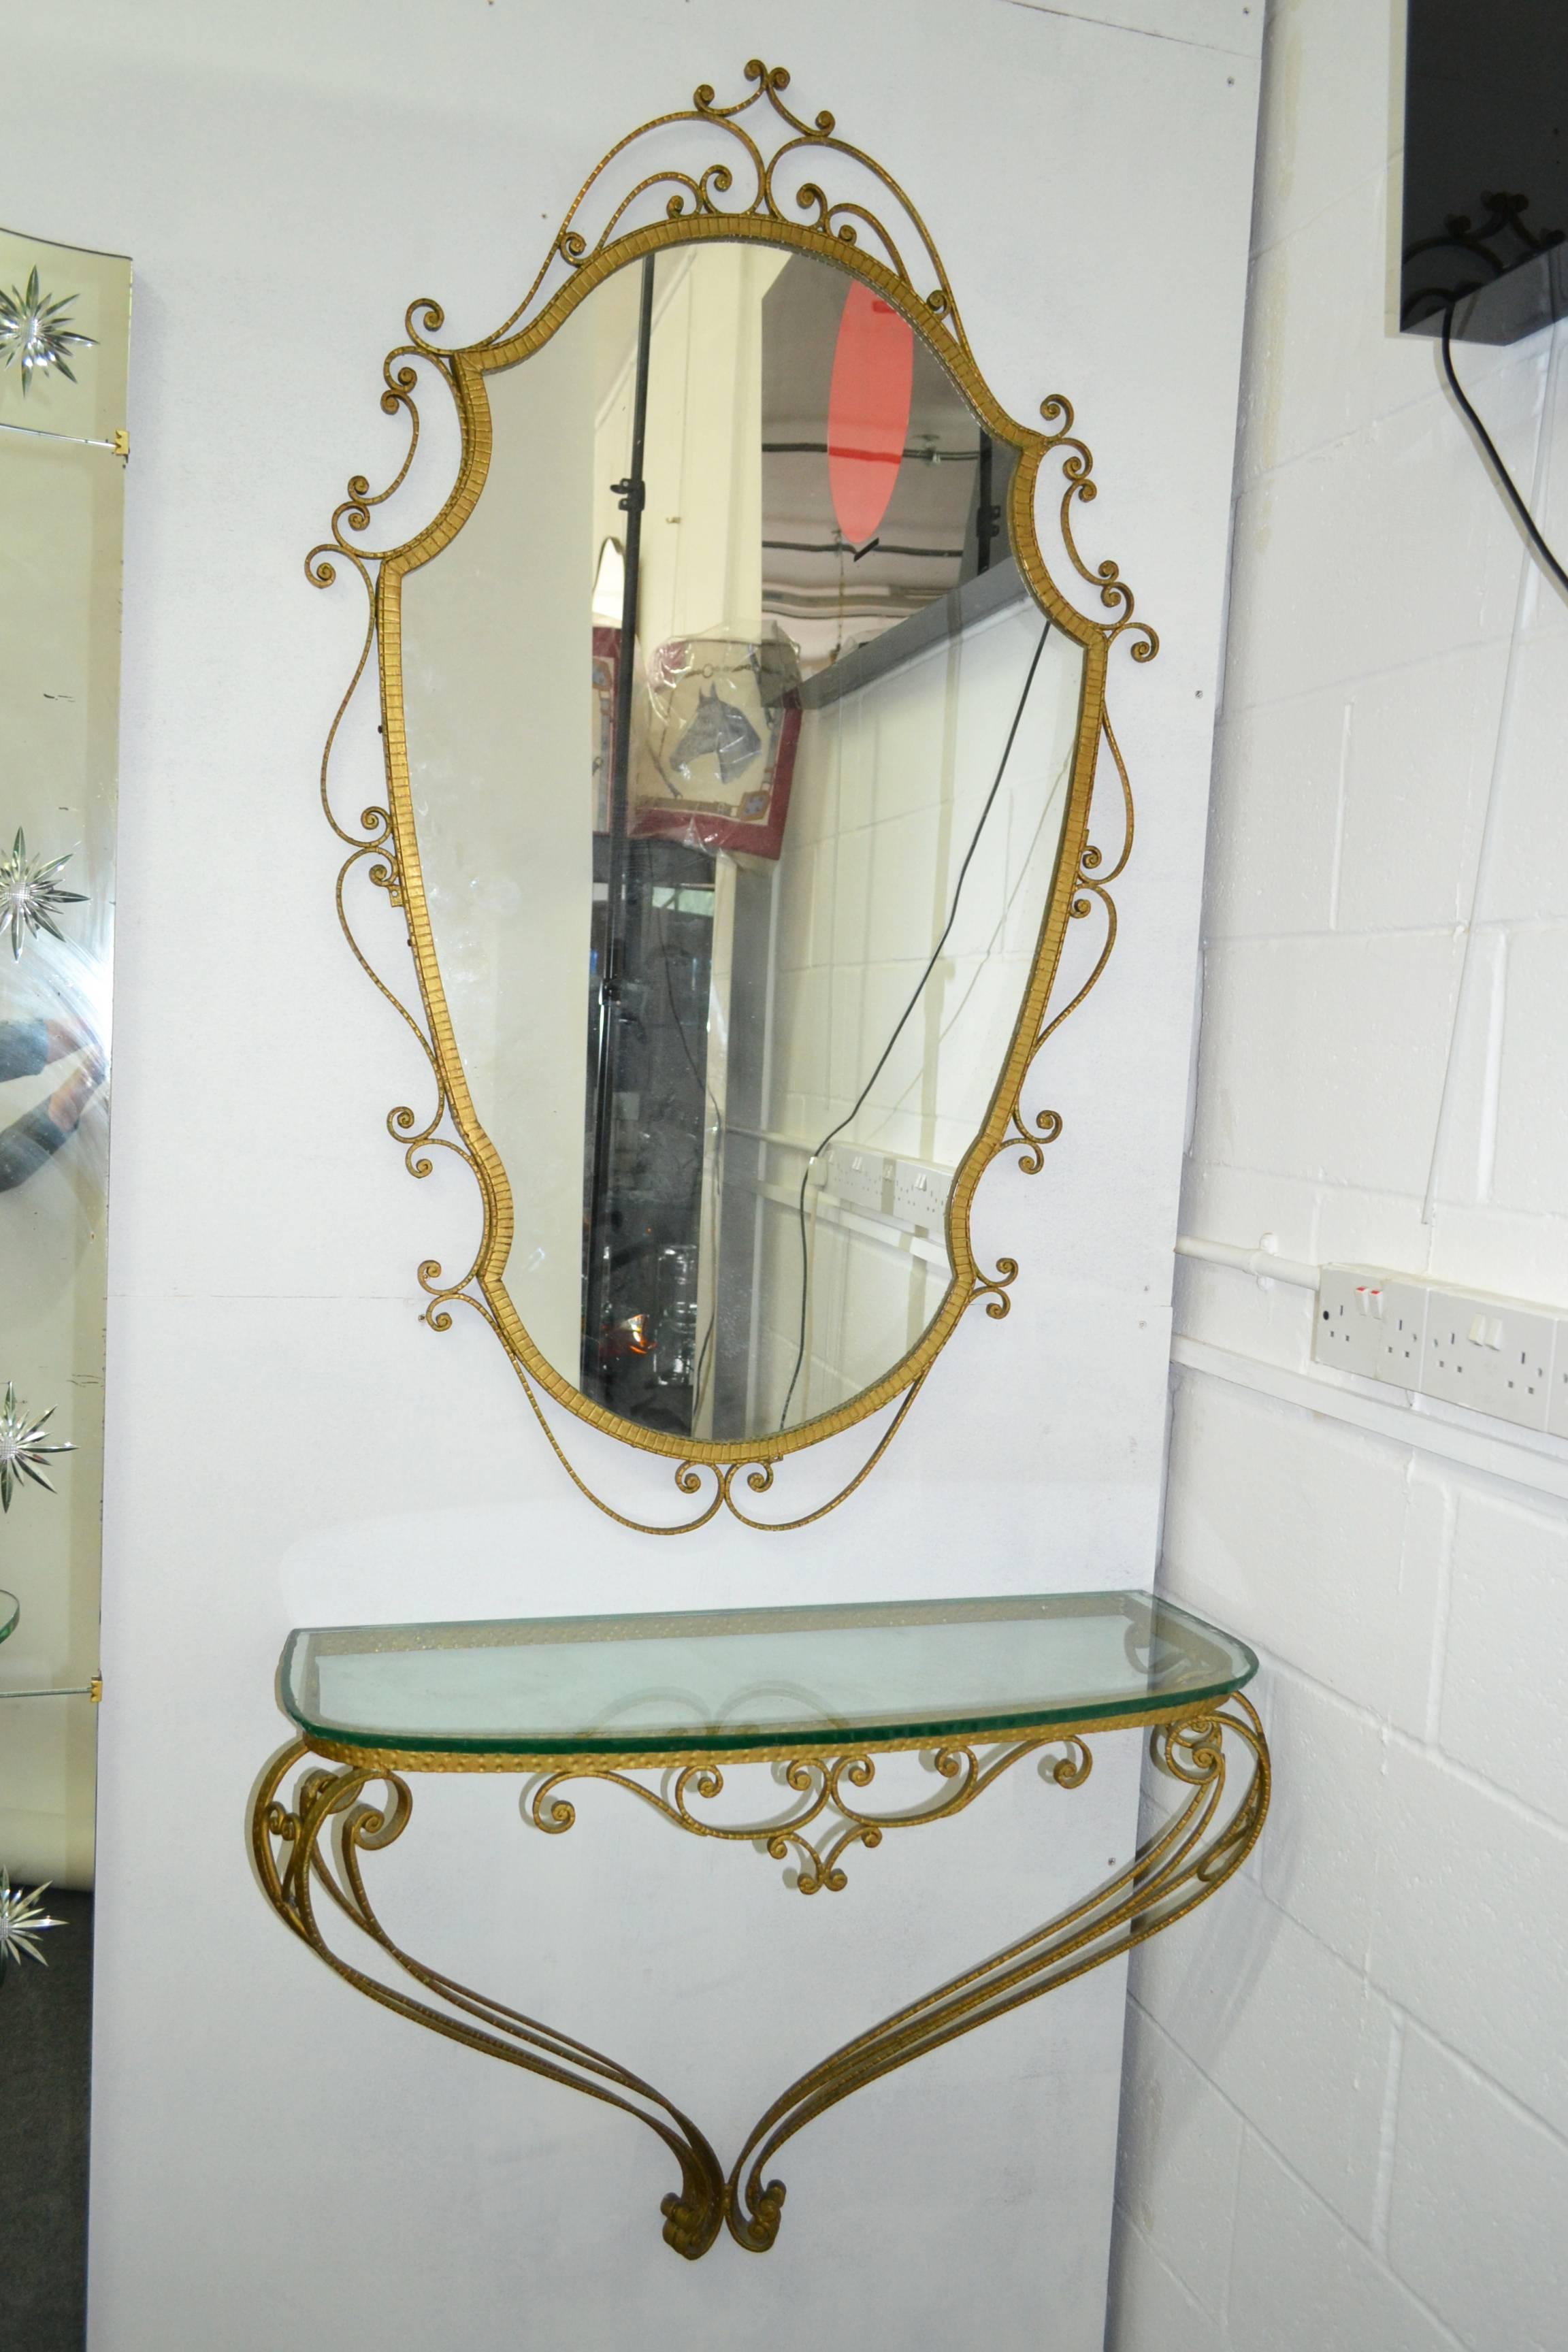 Iron gilt set with mirror and console with thick glass top by Pierluigi Colli-Torino-Italy from the 1950s.
Mirror size: H. 134cm W. 82cm D. 2.5cm.
Console size: H. 62cm W. 88cm D. 33cm.